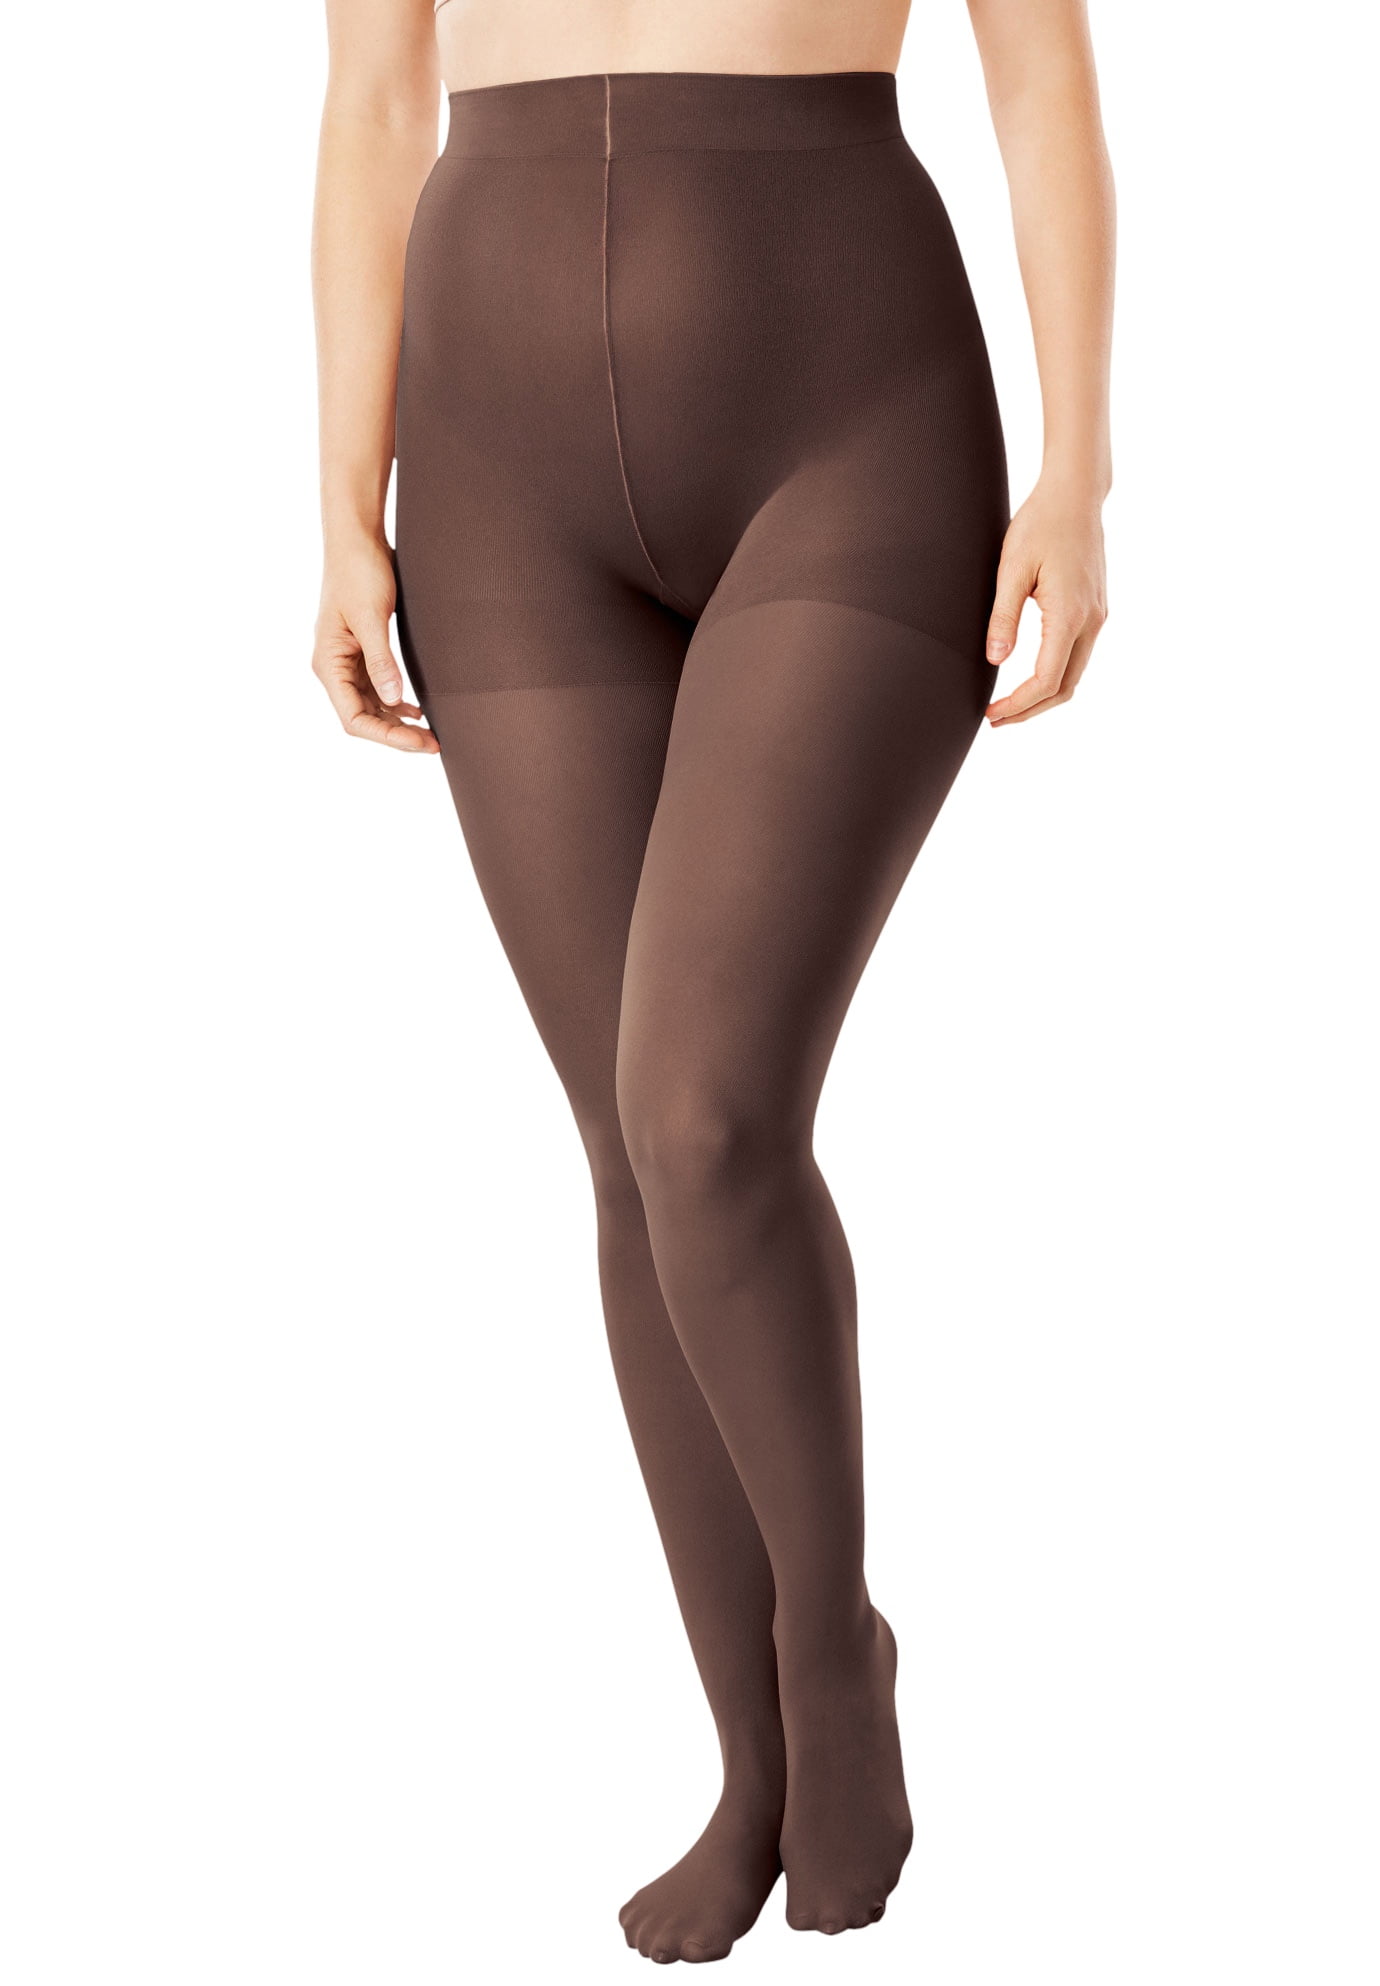 Comfort Choice Women's Plus Size 2-Pack Smoothing Tights Tights